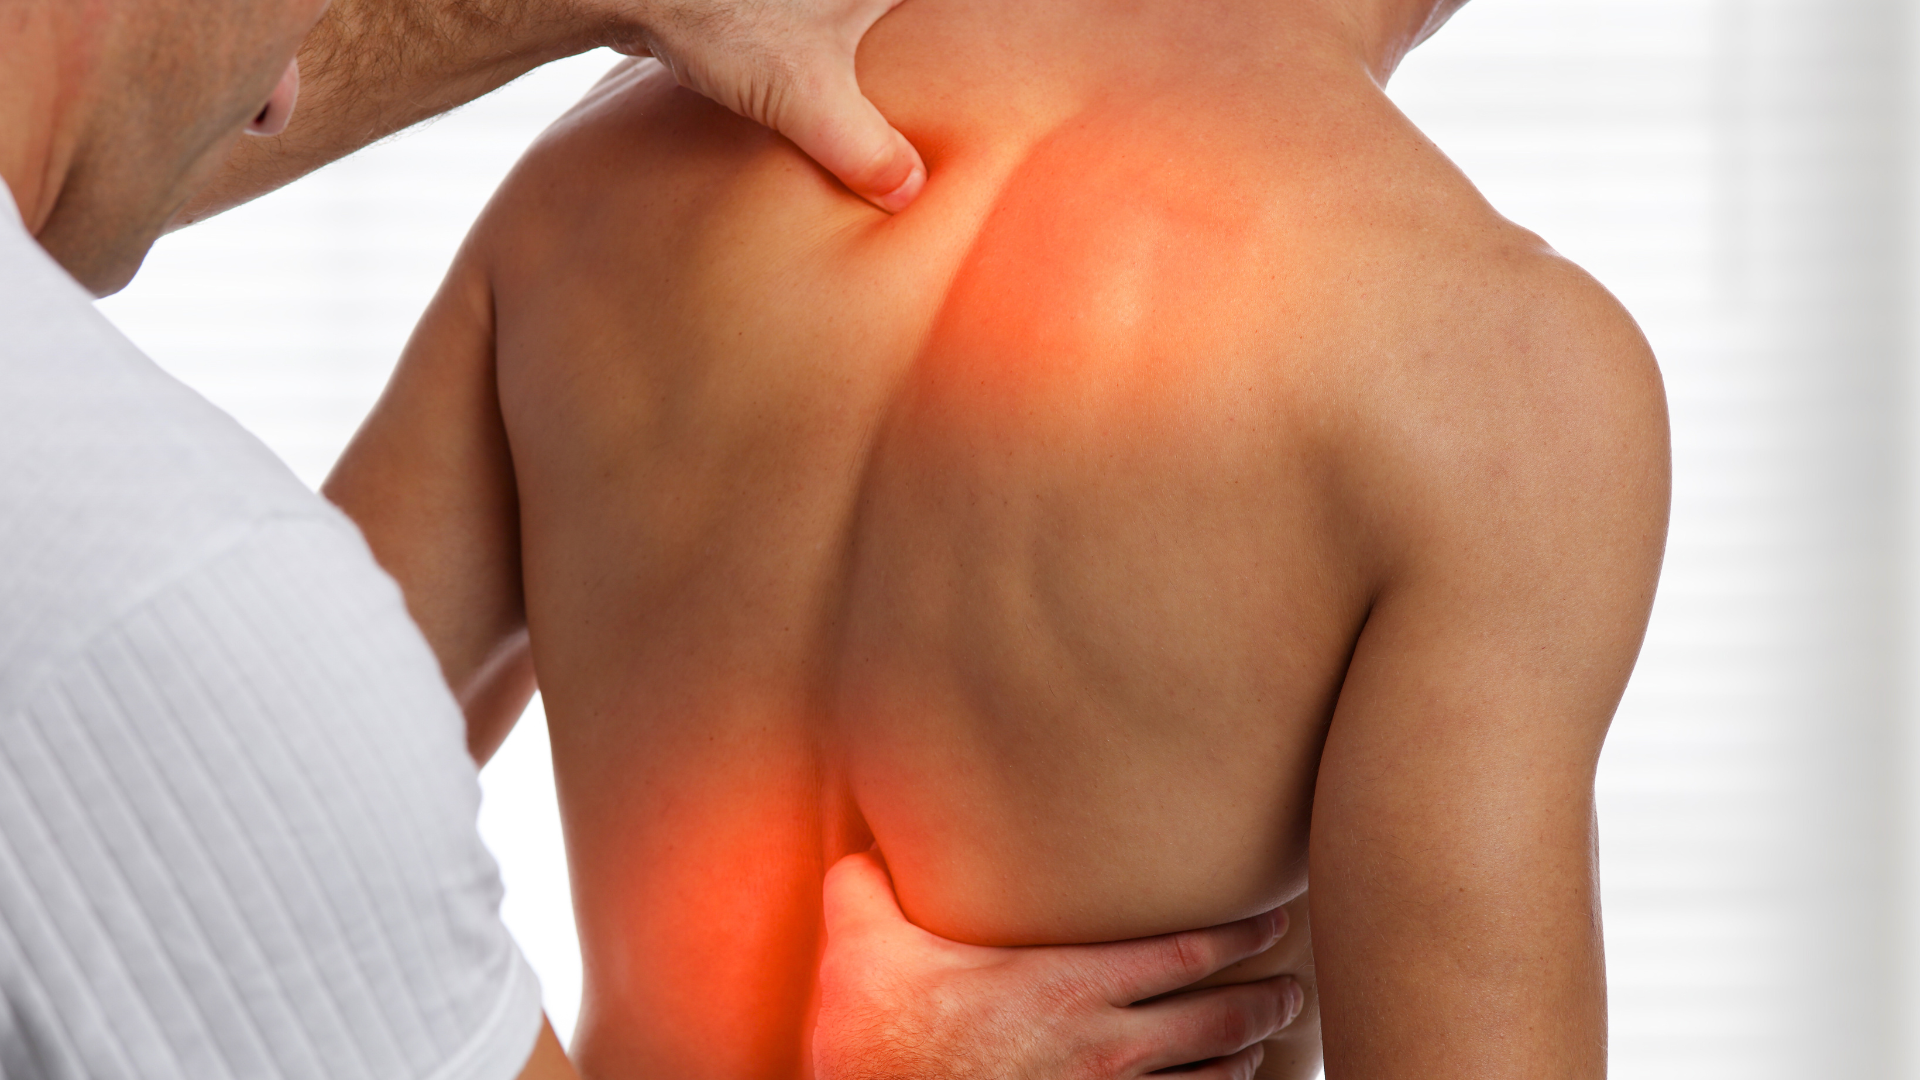 doctor checking man's inflamed back